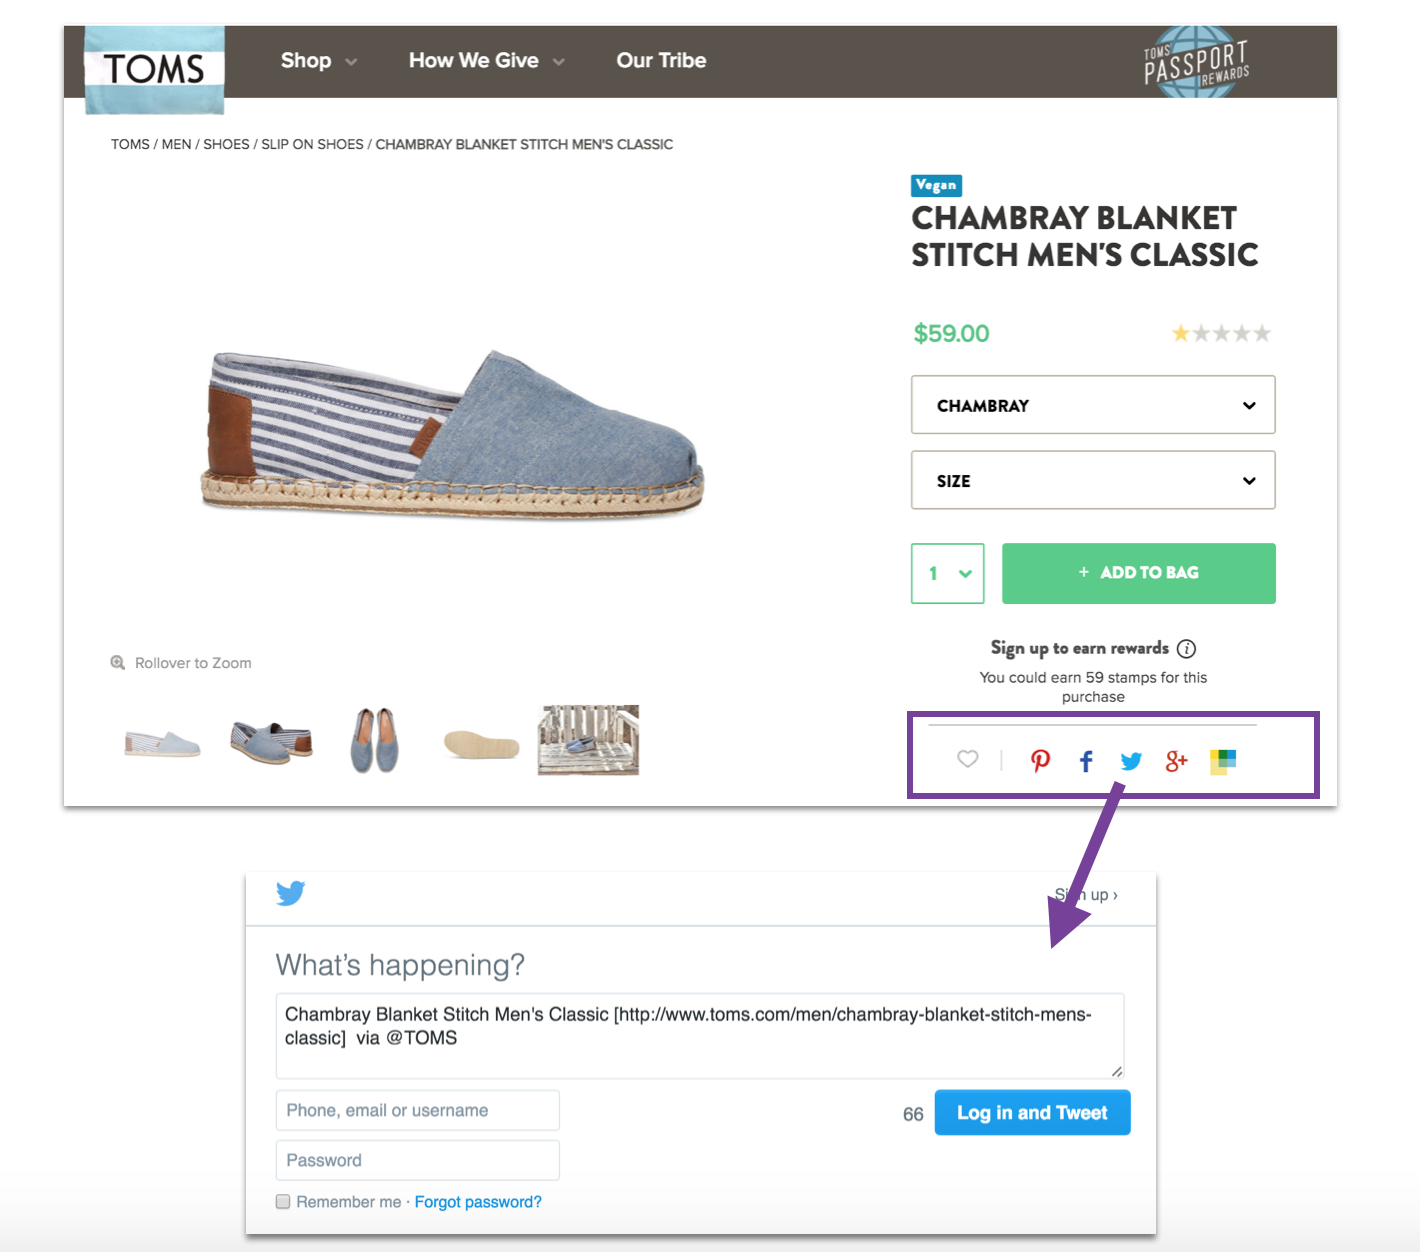 Social sharing for ecommerce increases sales